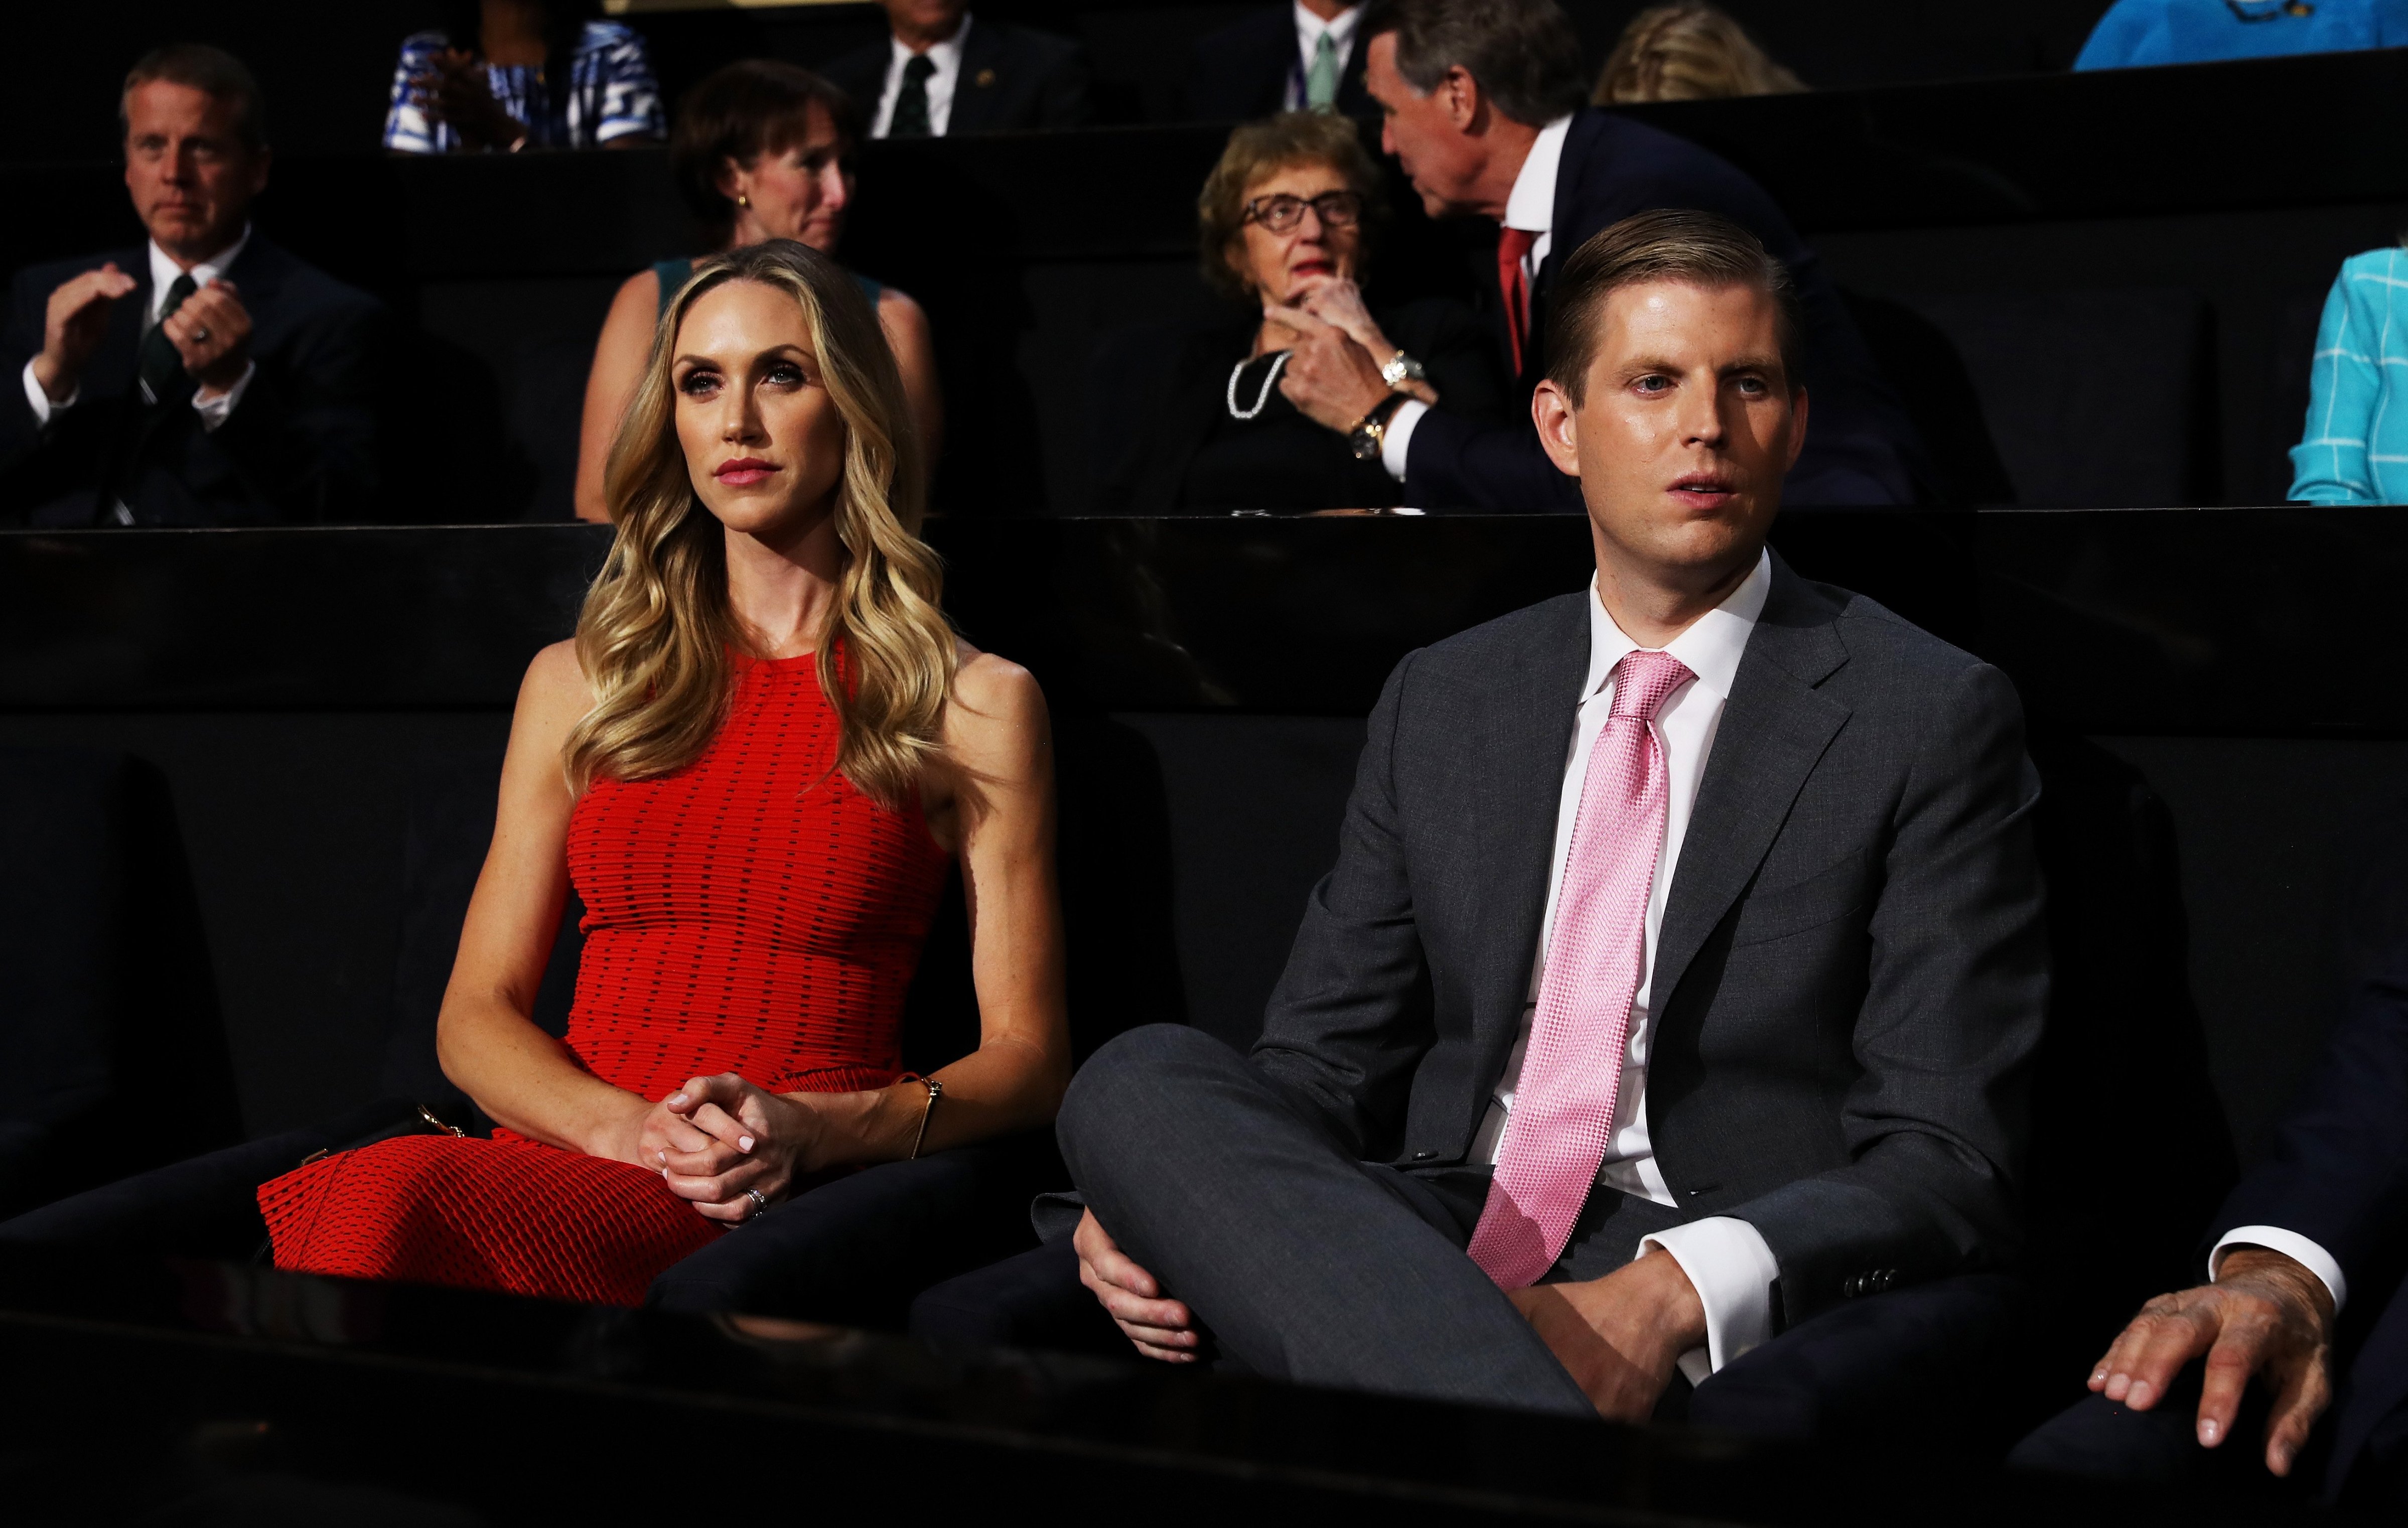 Eric Trump along with his wife, Lara Yunaska, attend the third day of the Republican National Convention on July 20, 2016 at the Quicken Loans Arena in Cleveland, Ohio. (Joe Raedle—Getty Images)